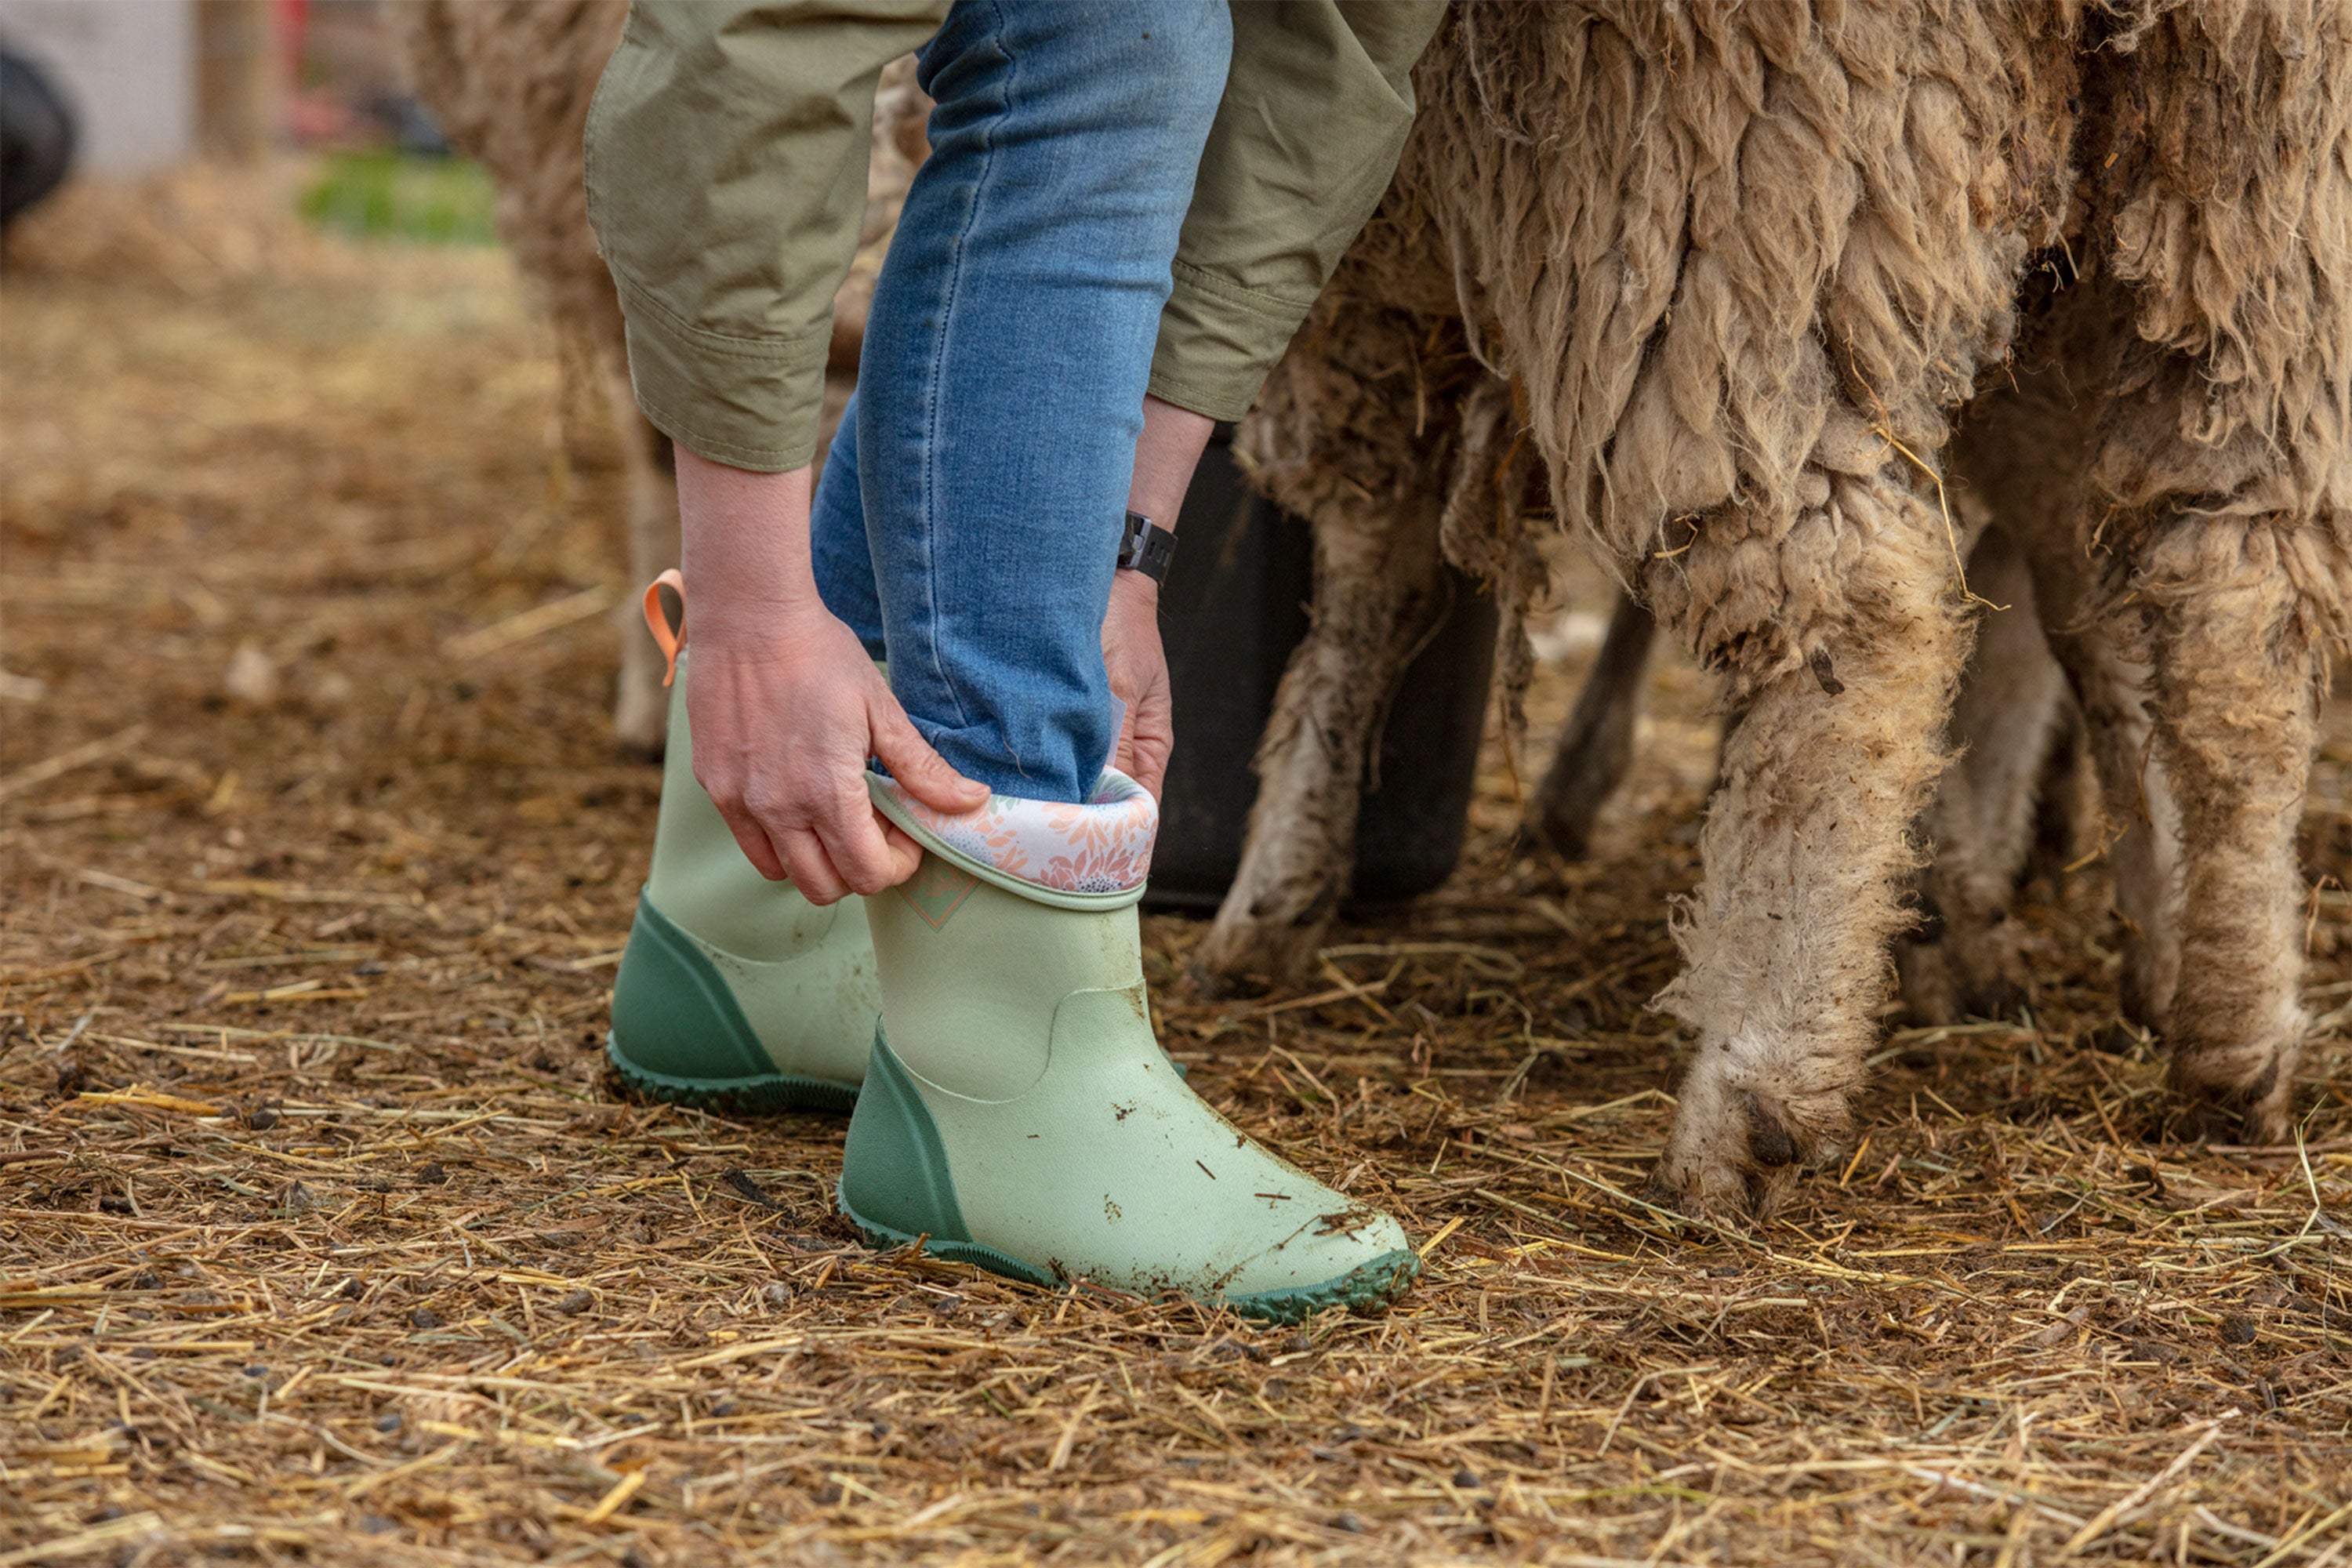 Person rolling down their boots while tending to sheep